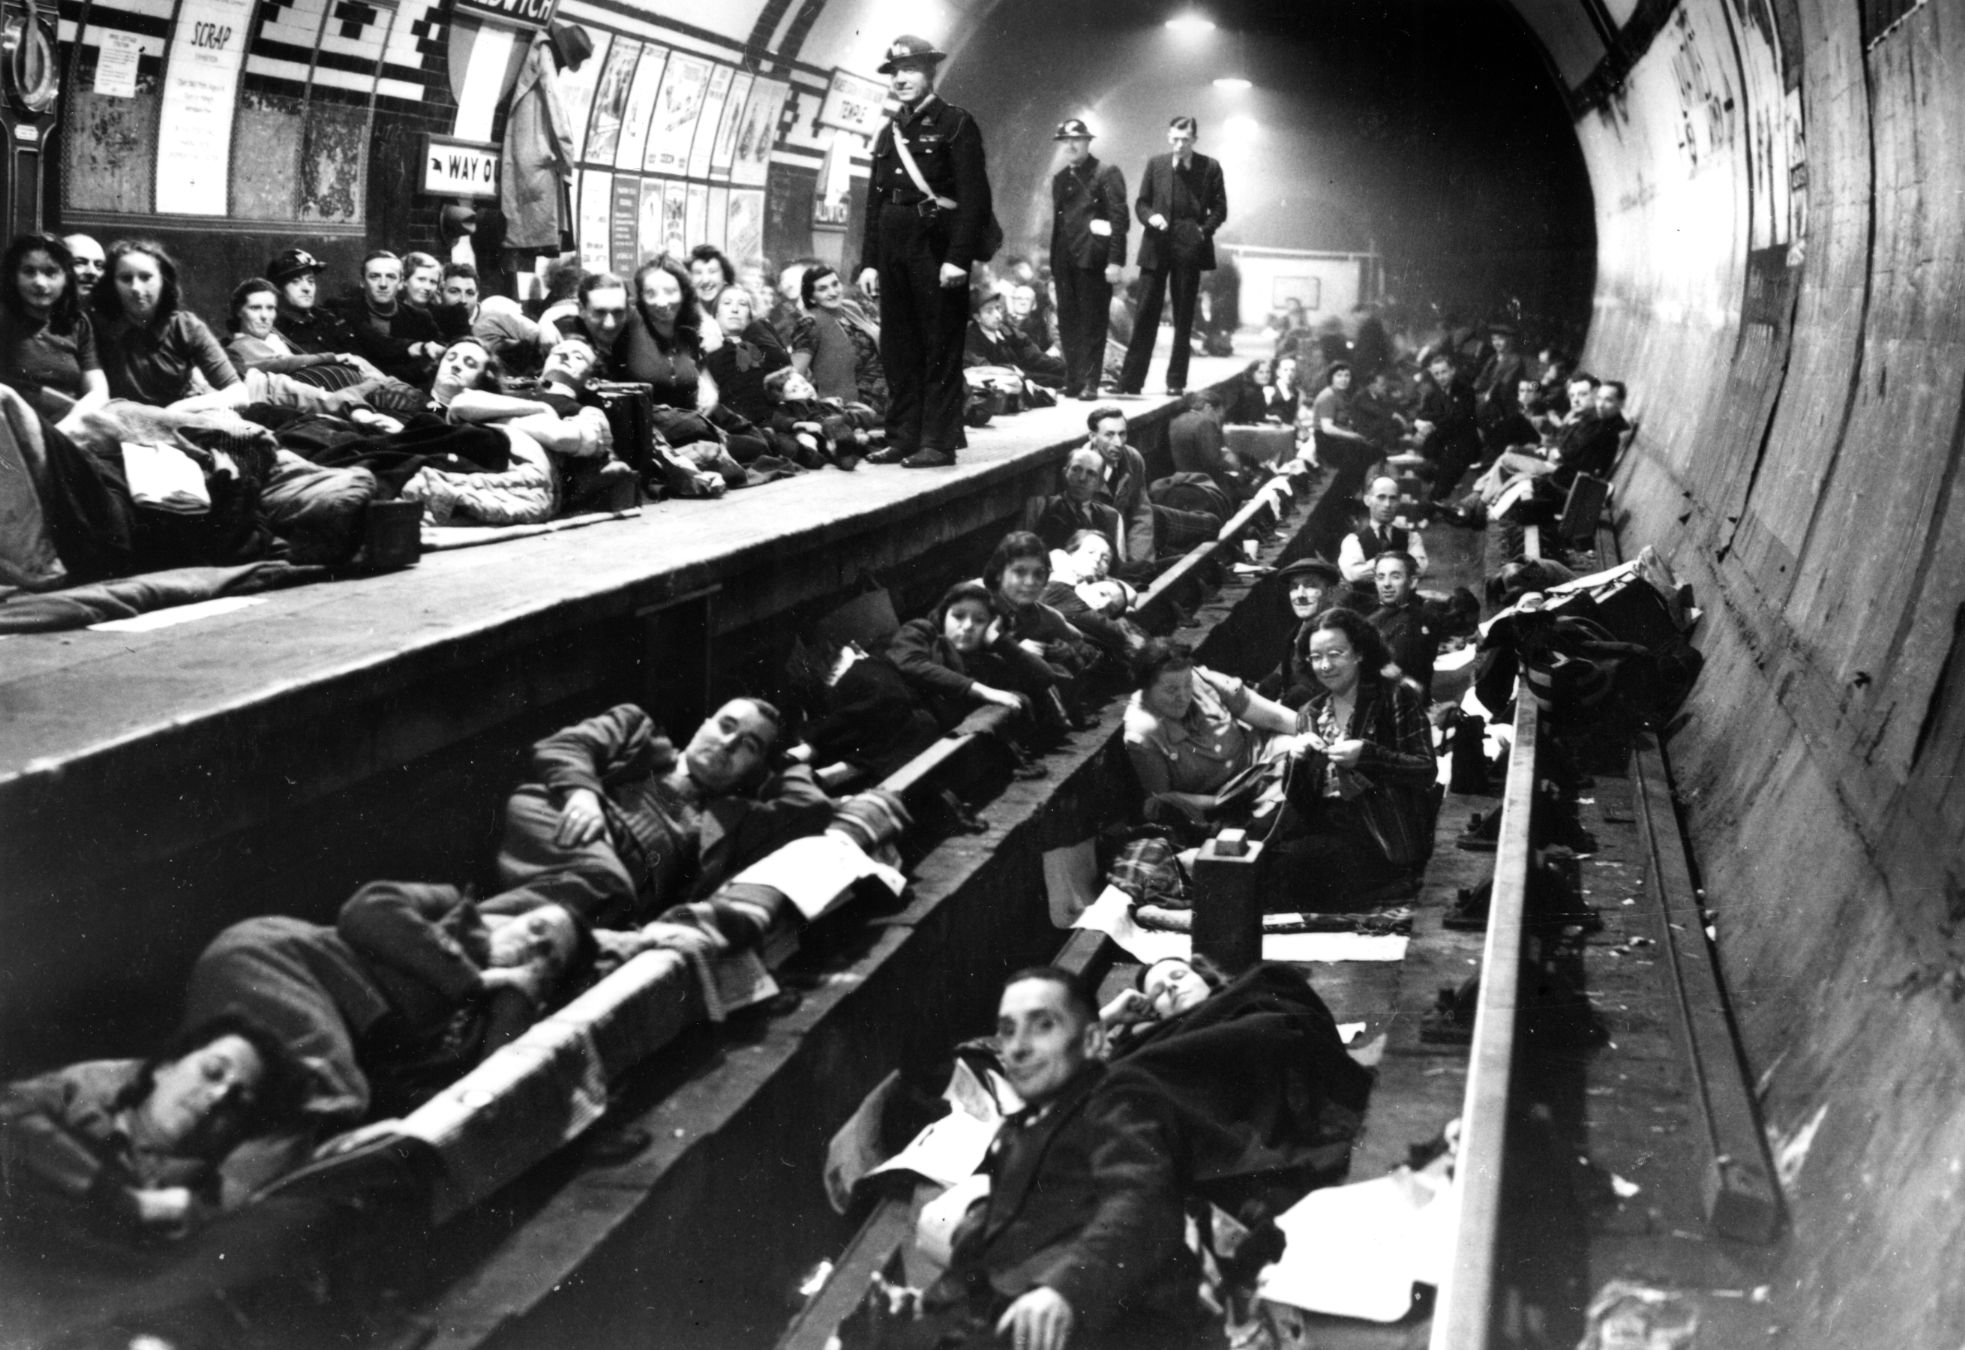 Seventy-nine of London’s tube stations served as air raid shelters during the Nazi Blitz of 1940. Although they provided a great deal of protection against the lethal bombs of the Luftwaffe, the stations could not survive a direct hit by a heavy explosive.